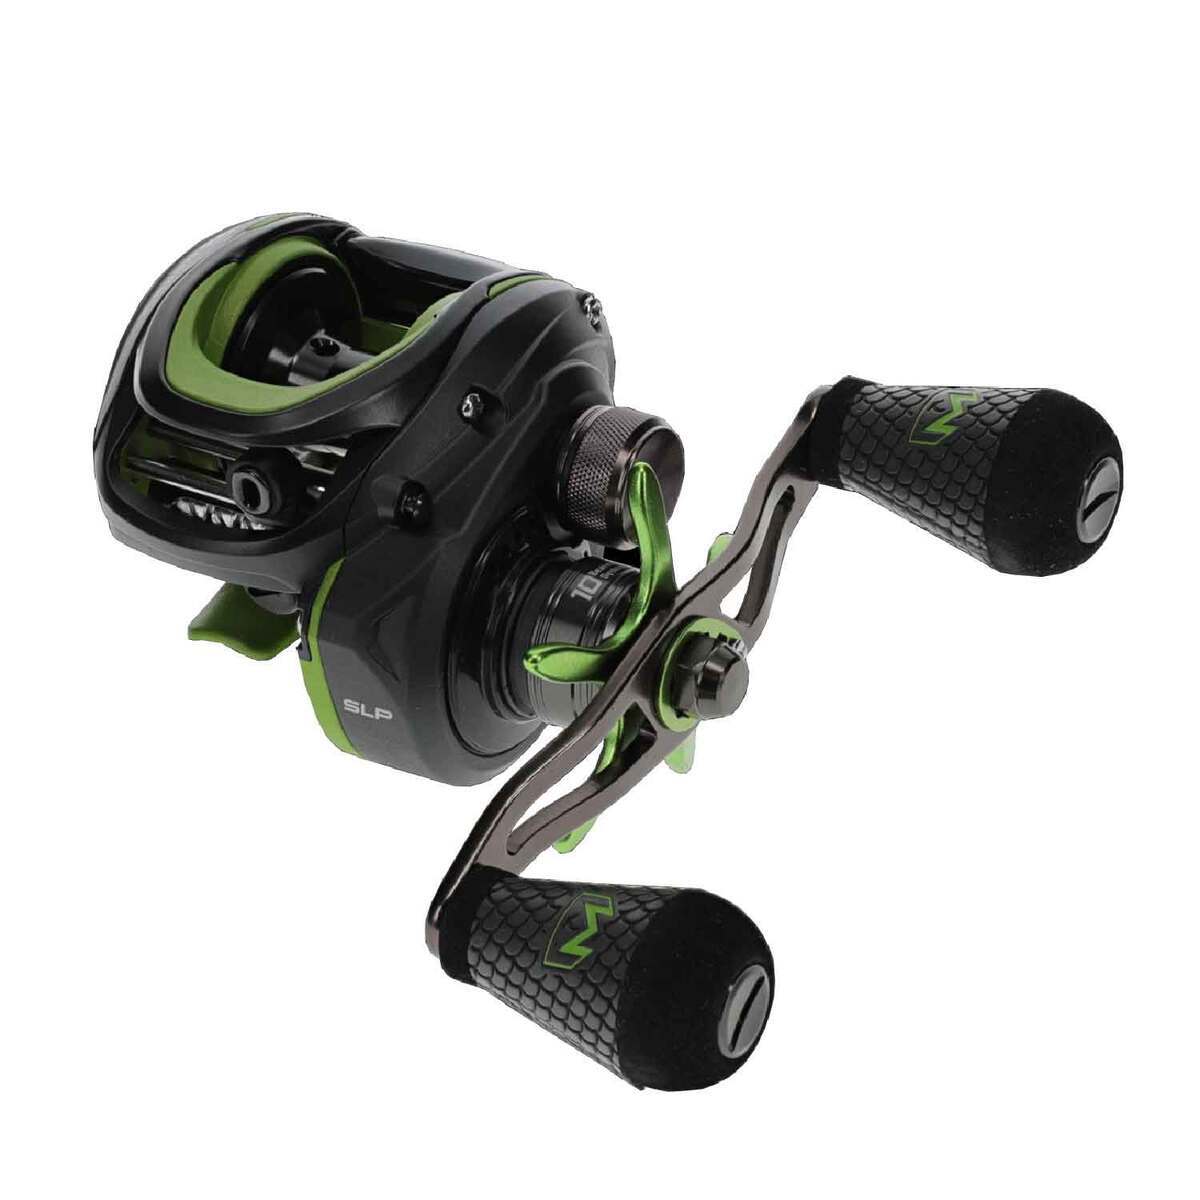 Lew's Mach 2 Baitcast raises the bar in looks and performance of a